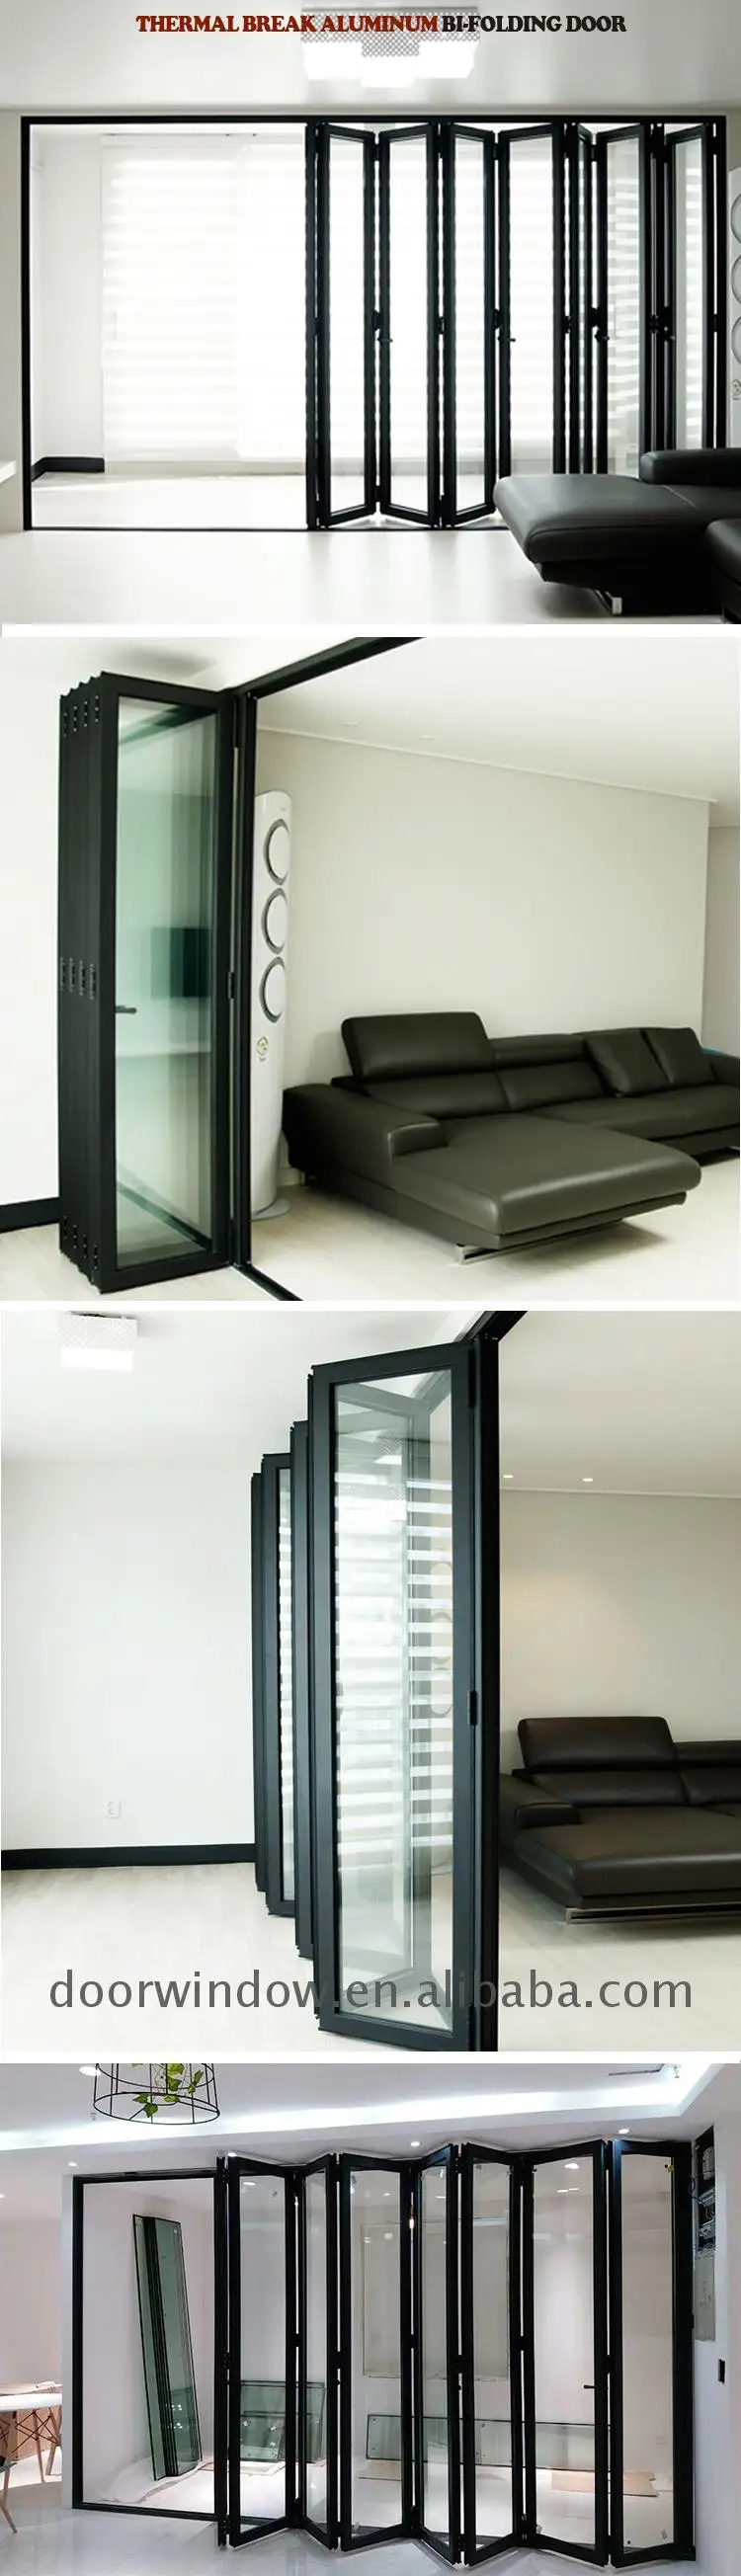 New style special order bifold doors soundproof internal